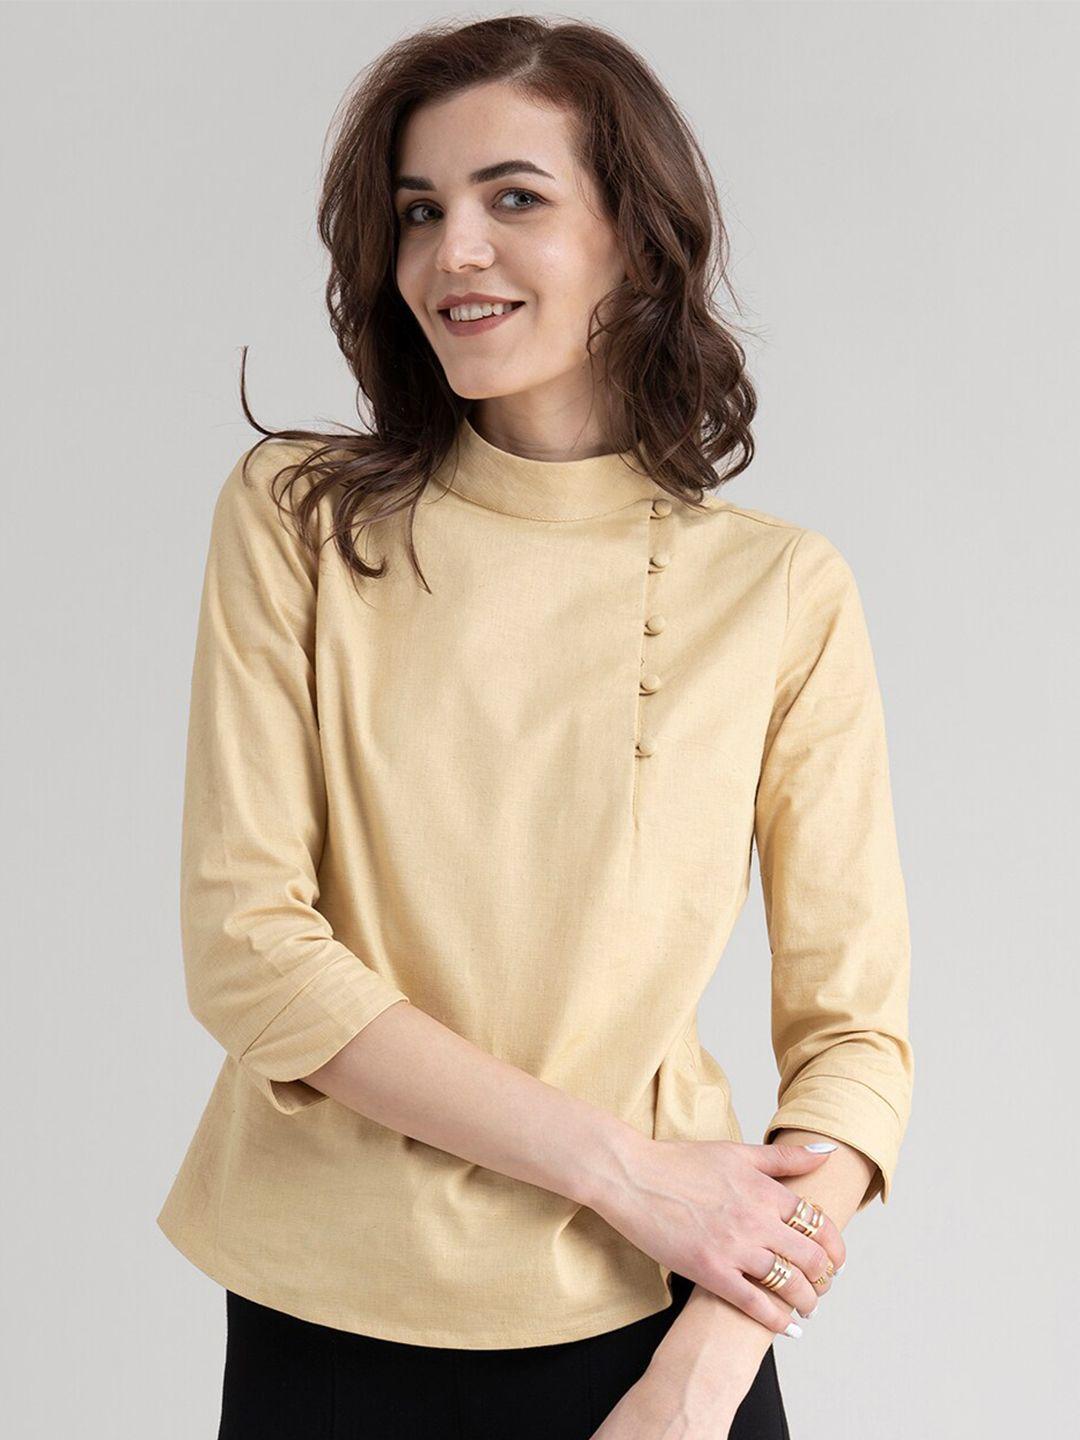 fablestreet-yellow-high-neck-top